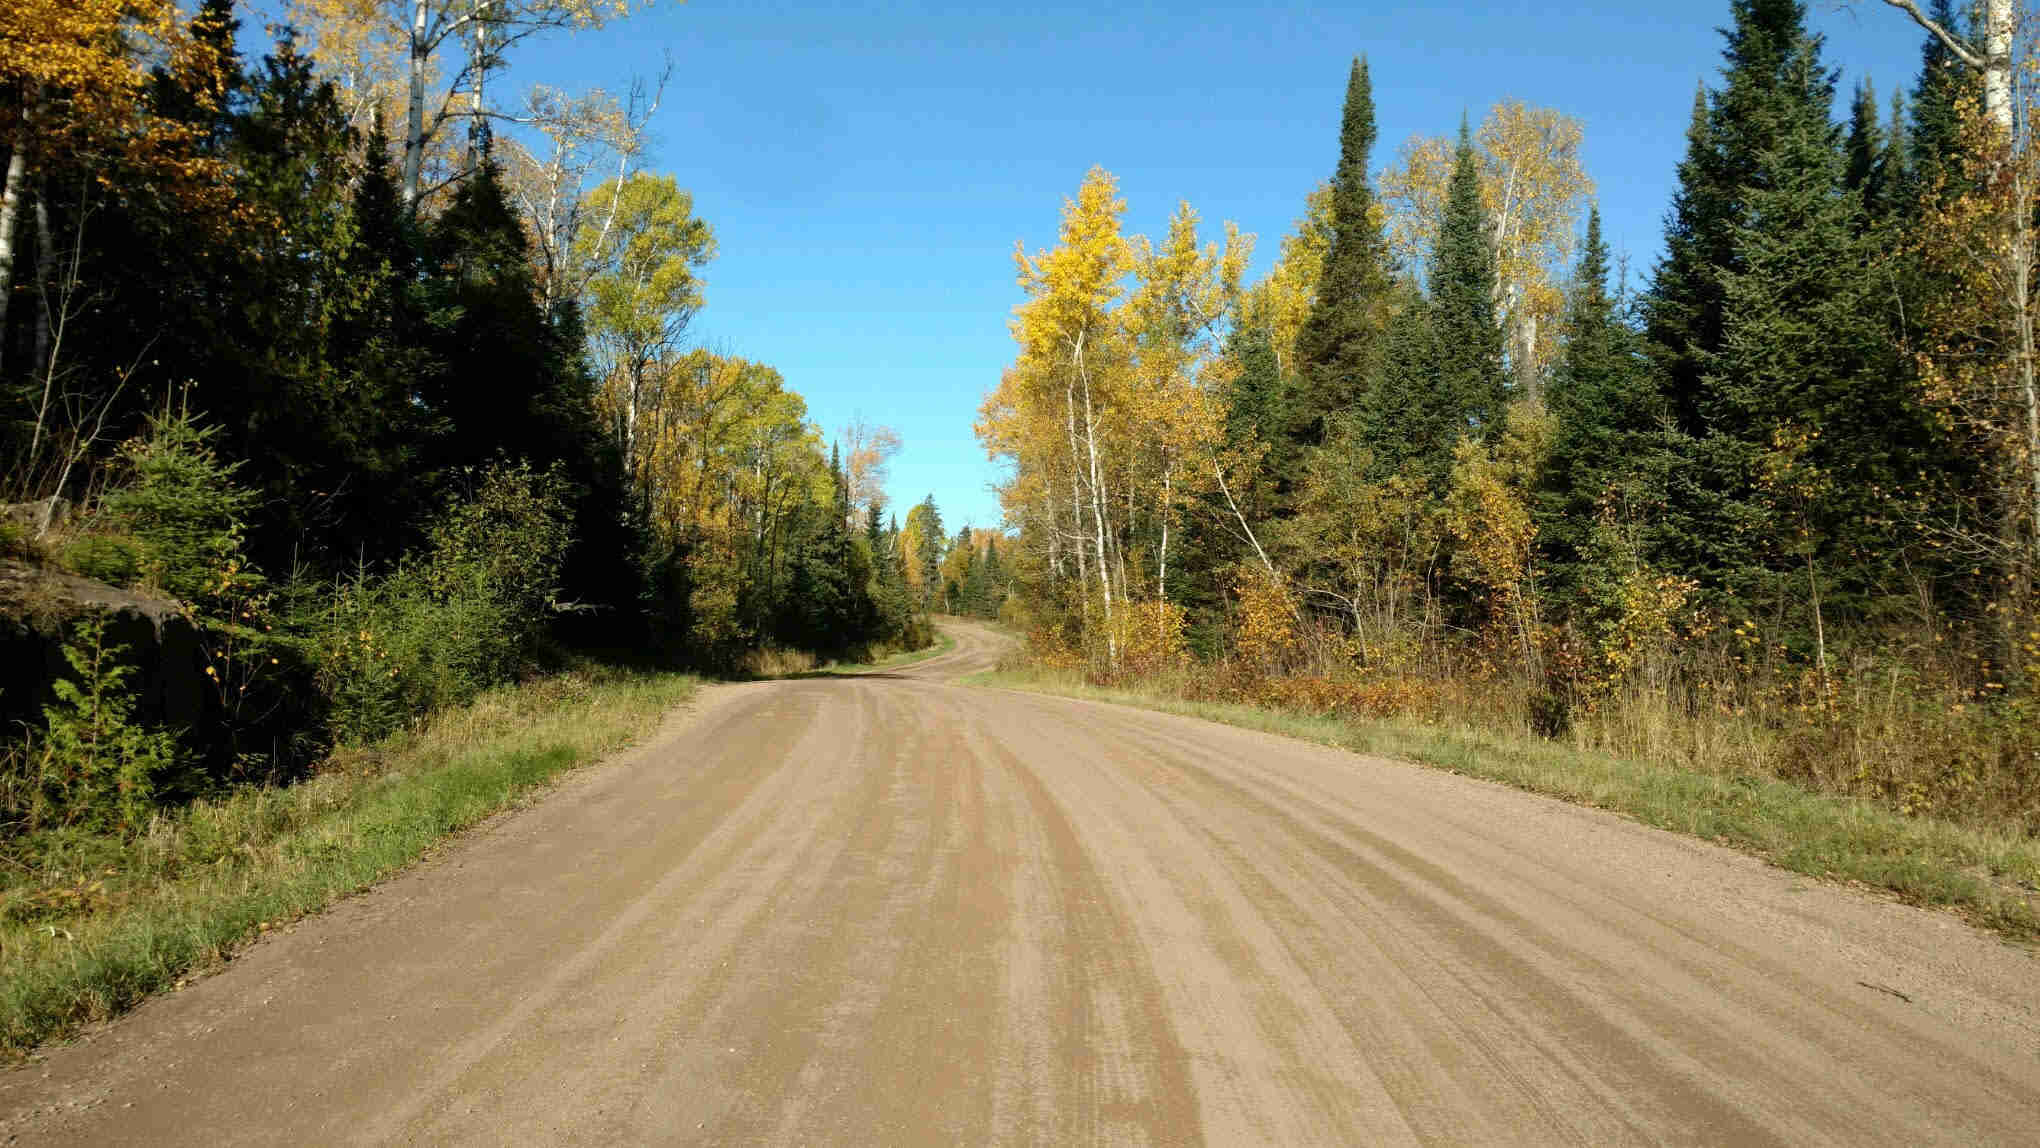 View facing down a wide gravel road with trees on the sides